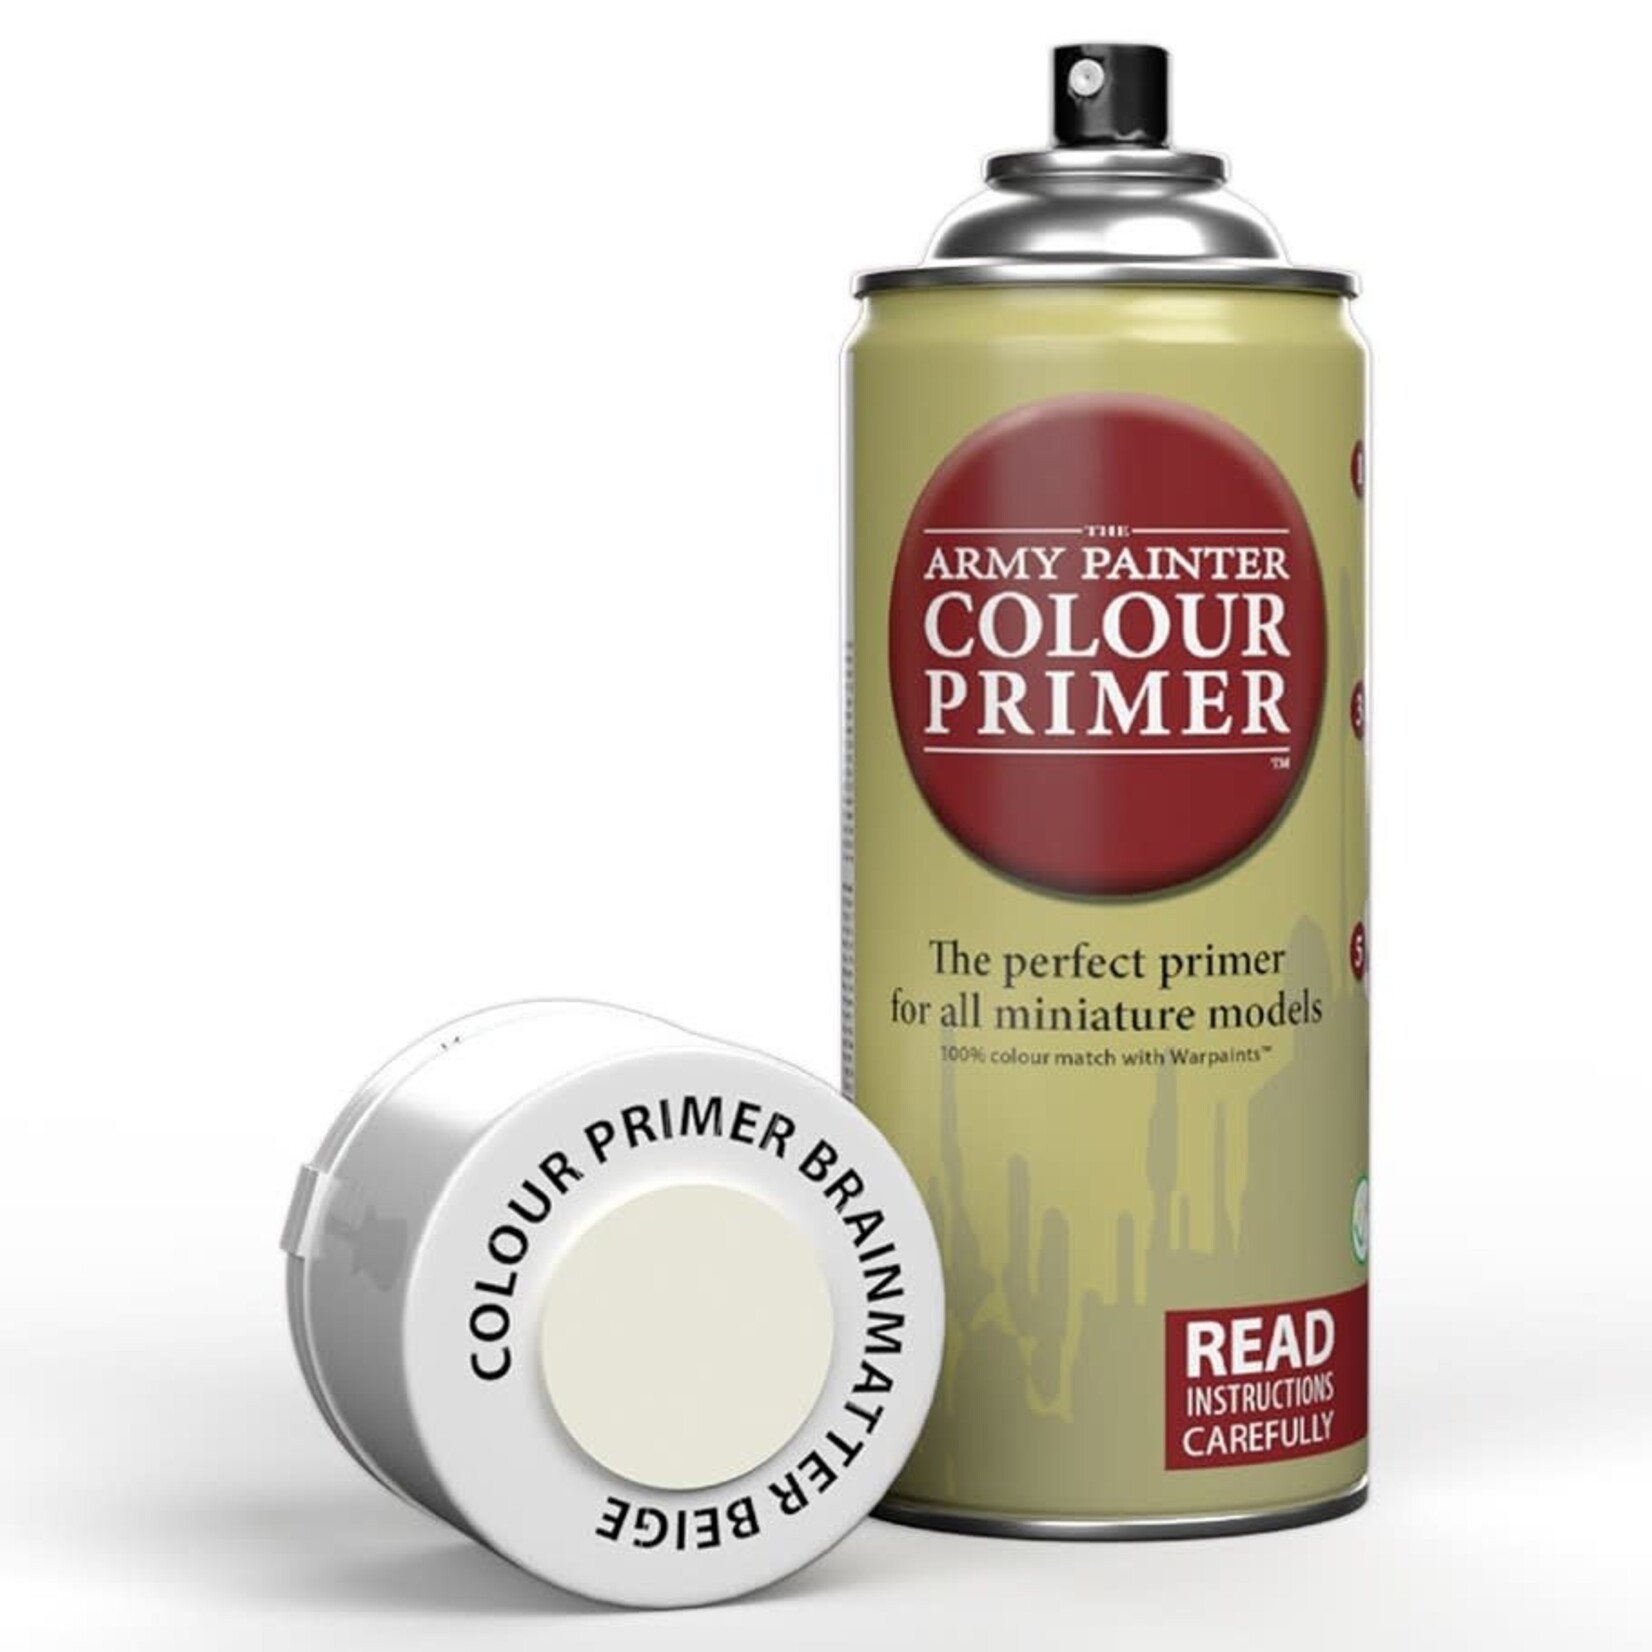 The Army Painter Colour Primer: Brainmatter Beige